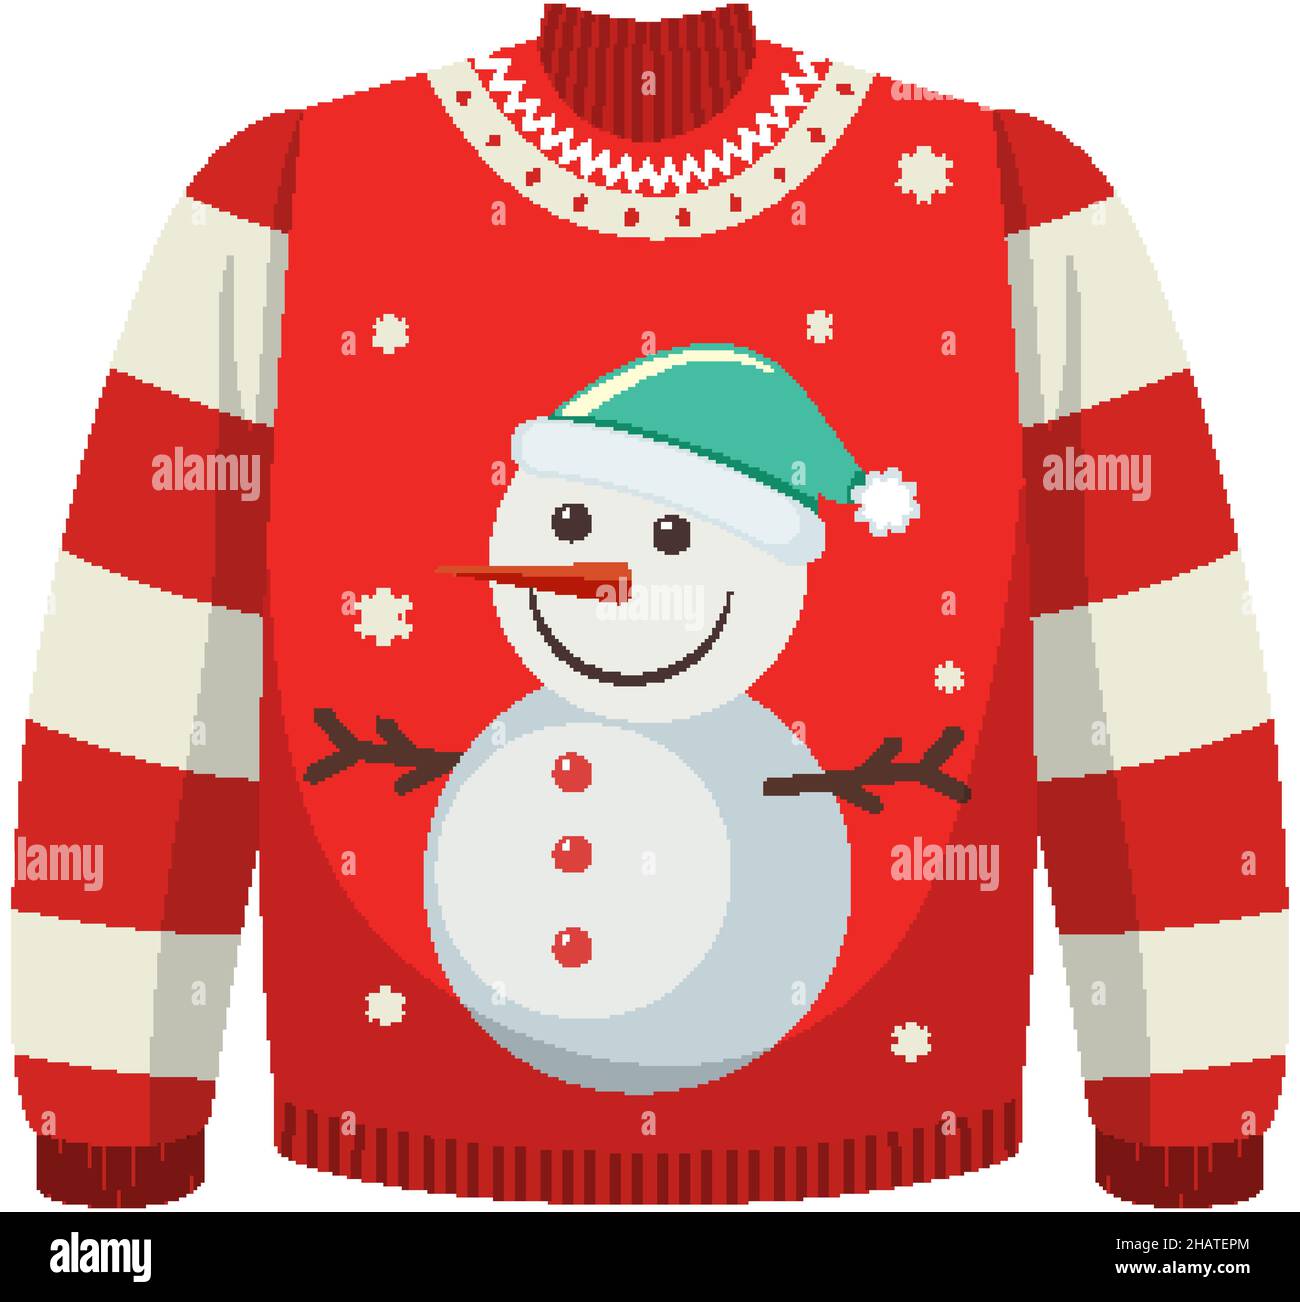 Christmas Sweater Collection Stock Illustration - Download Image